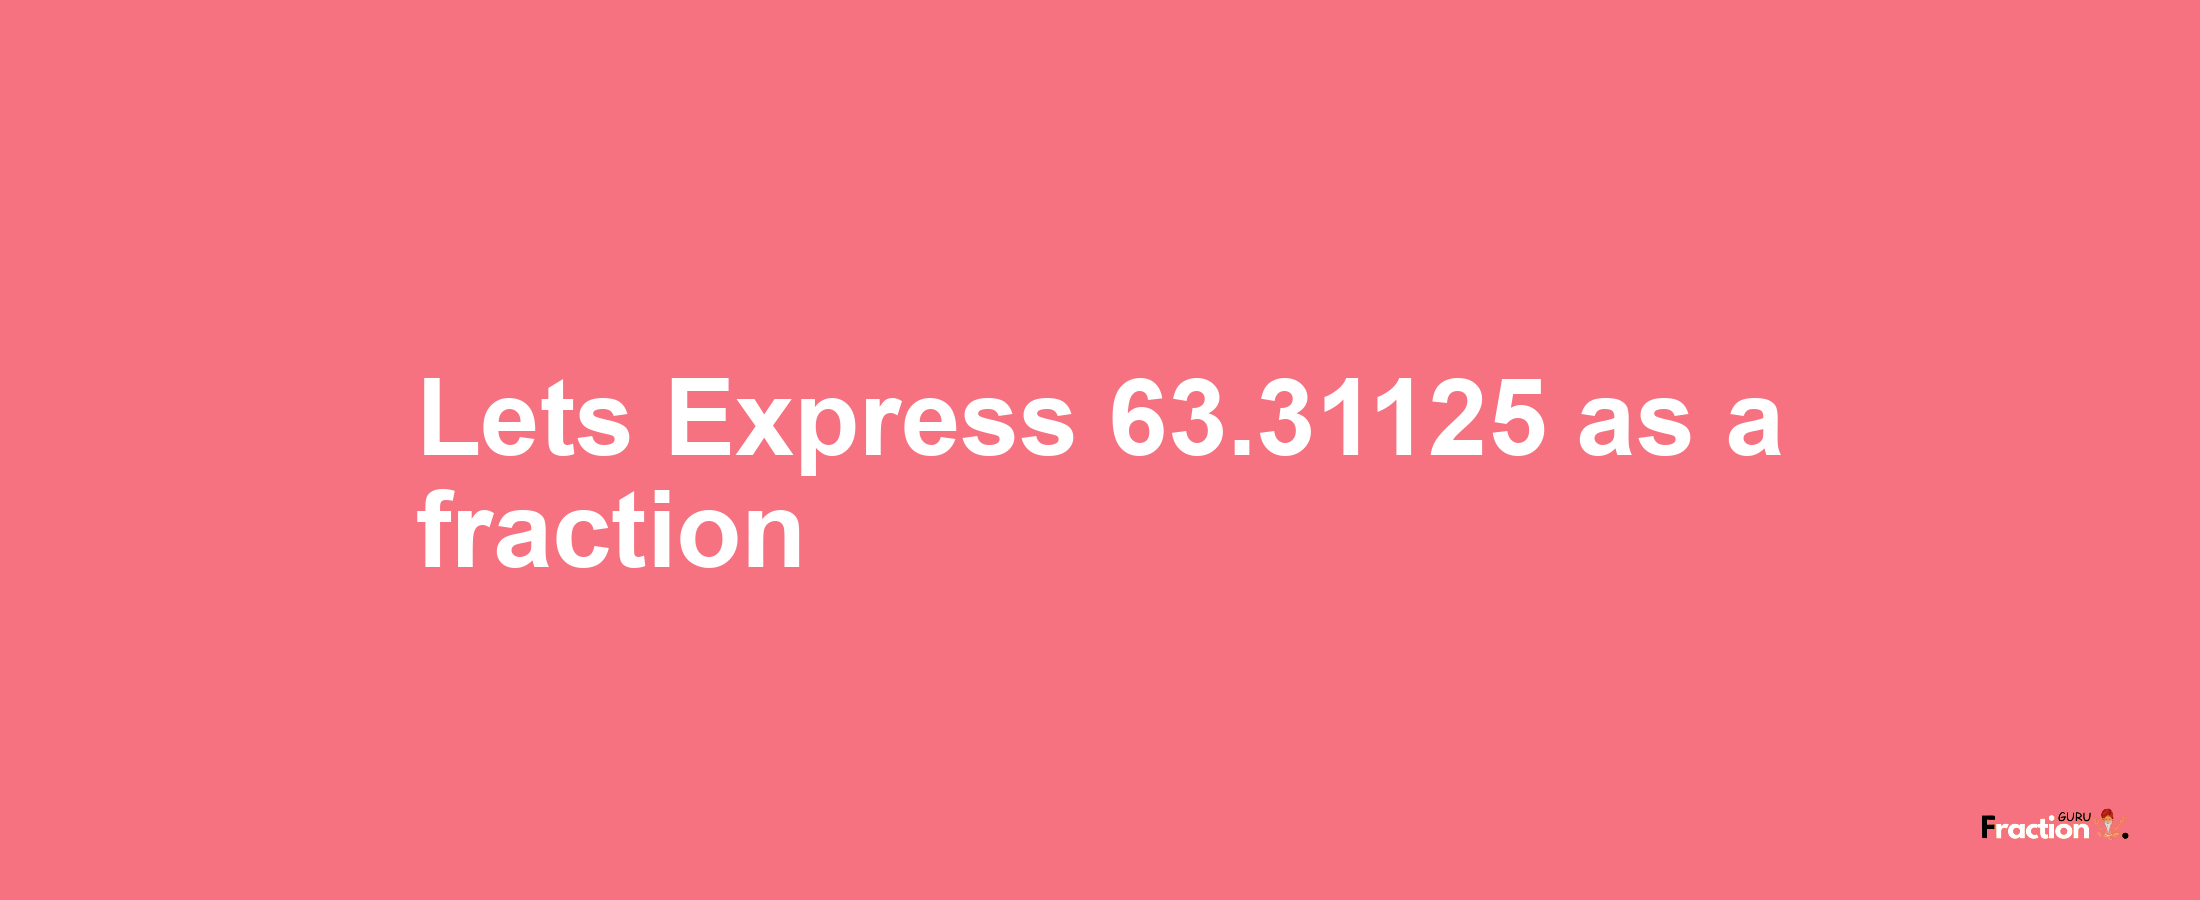 Lets Express 63.31125 as afraction